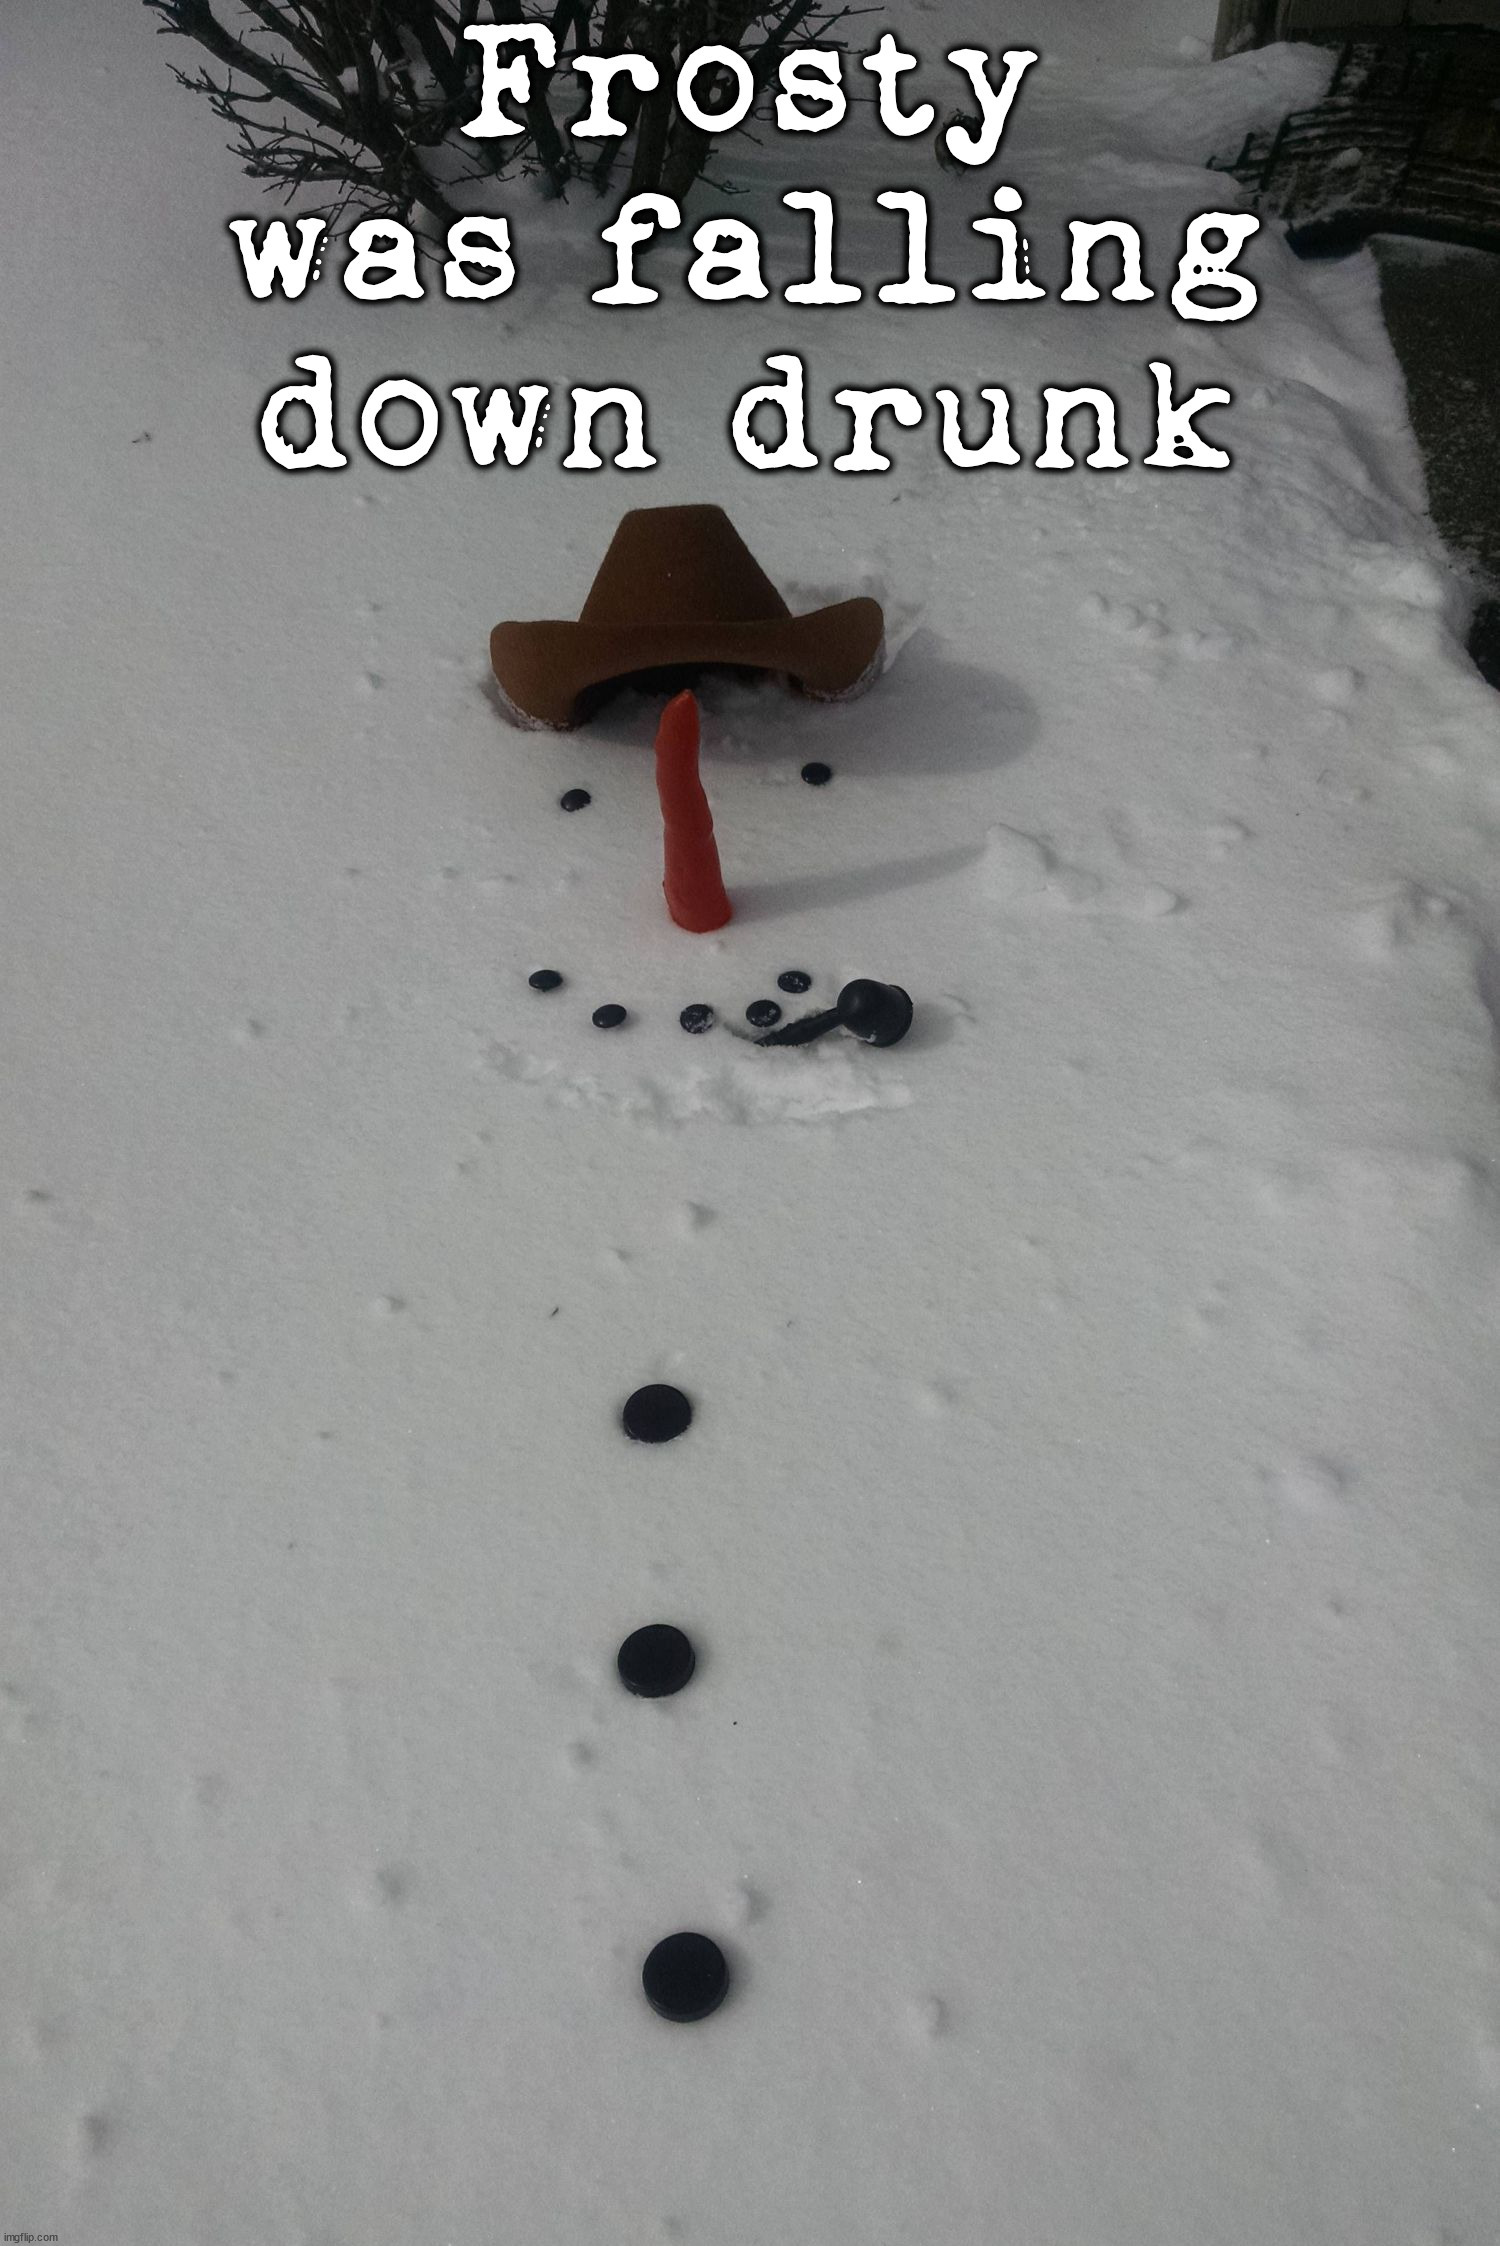 Be careful where you fall when drunk | image tagged in frosty,drunk | made w/ Imgflip meme maker